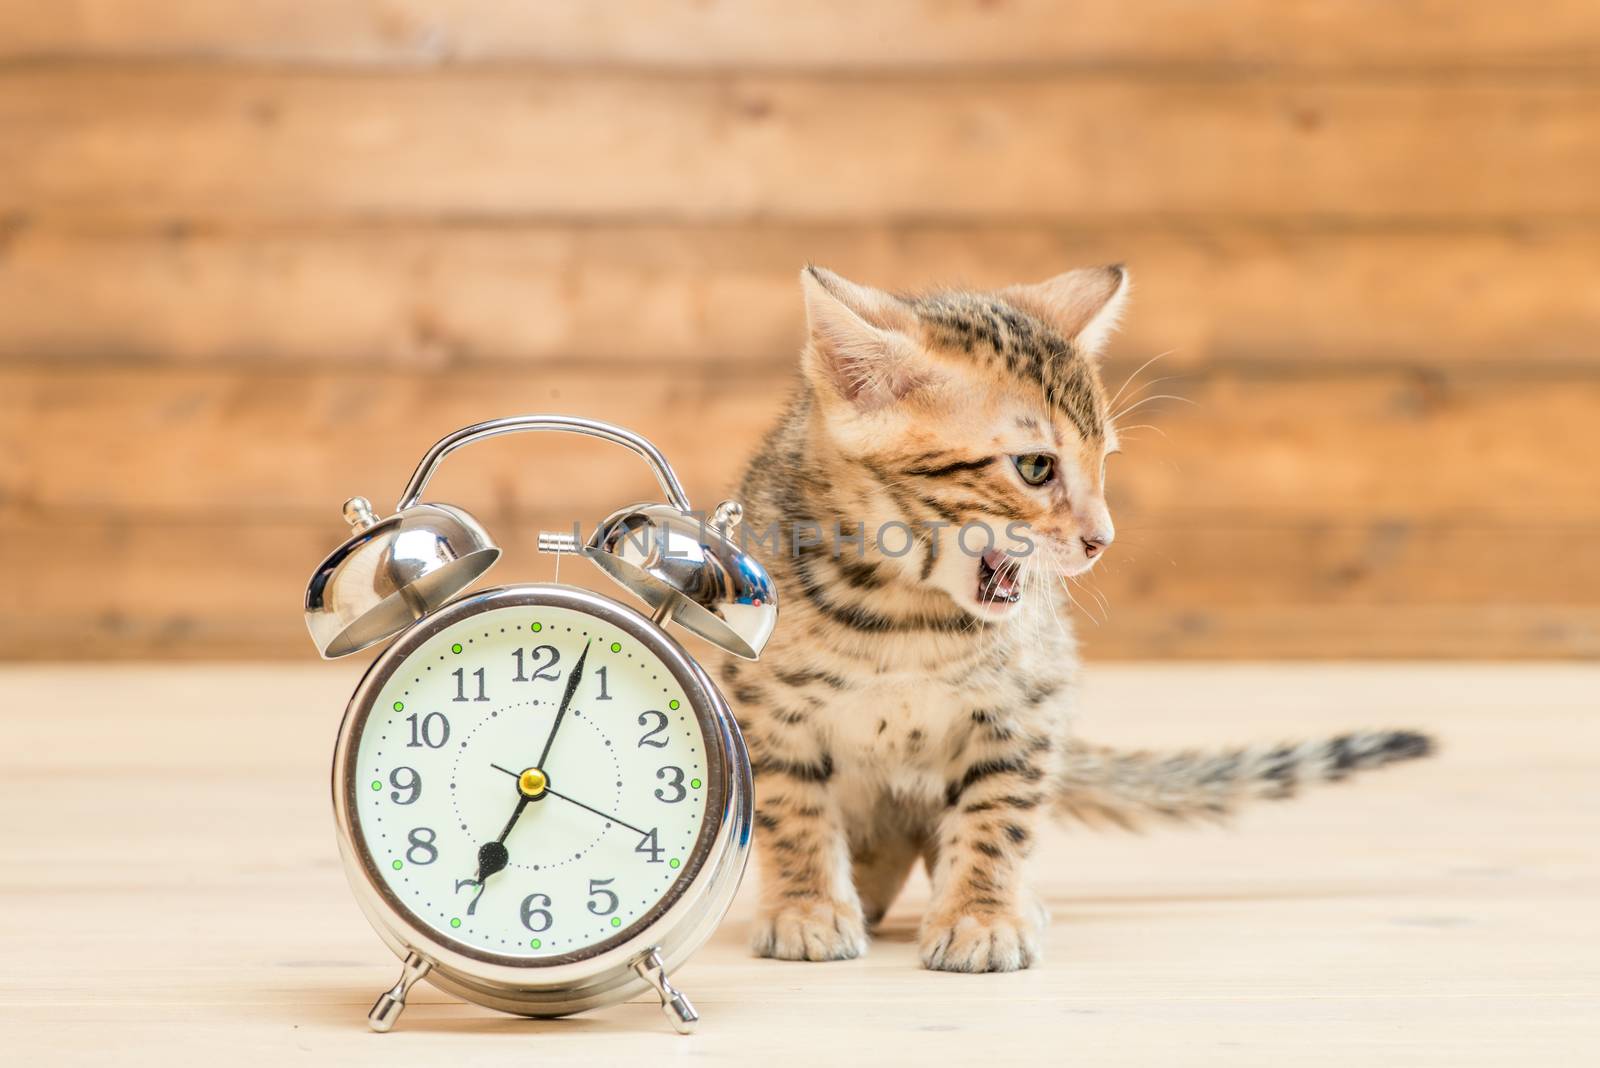 Bengal breed kitten and a retro alarm clock that shows 7 hours